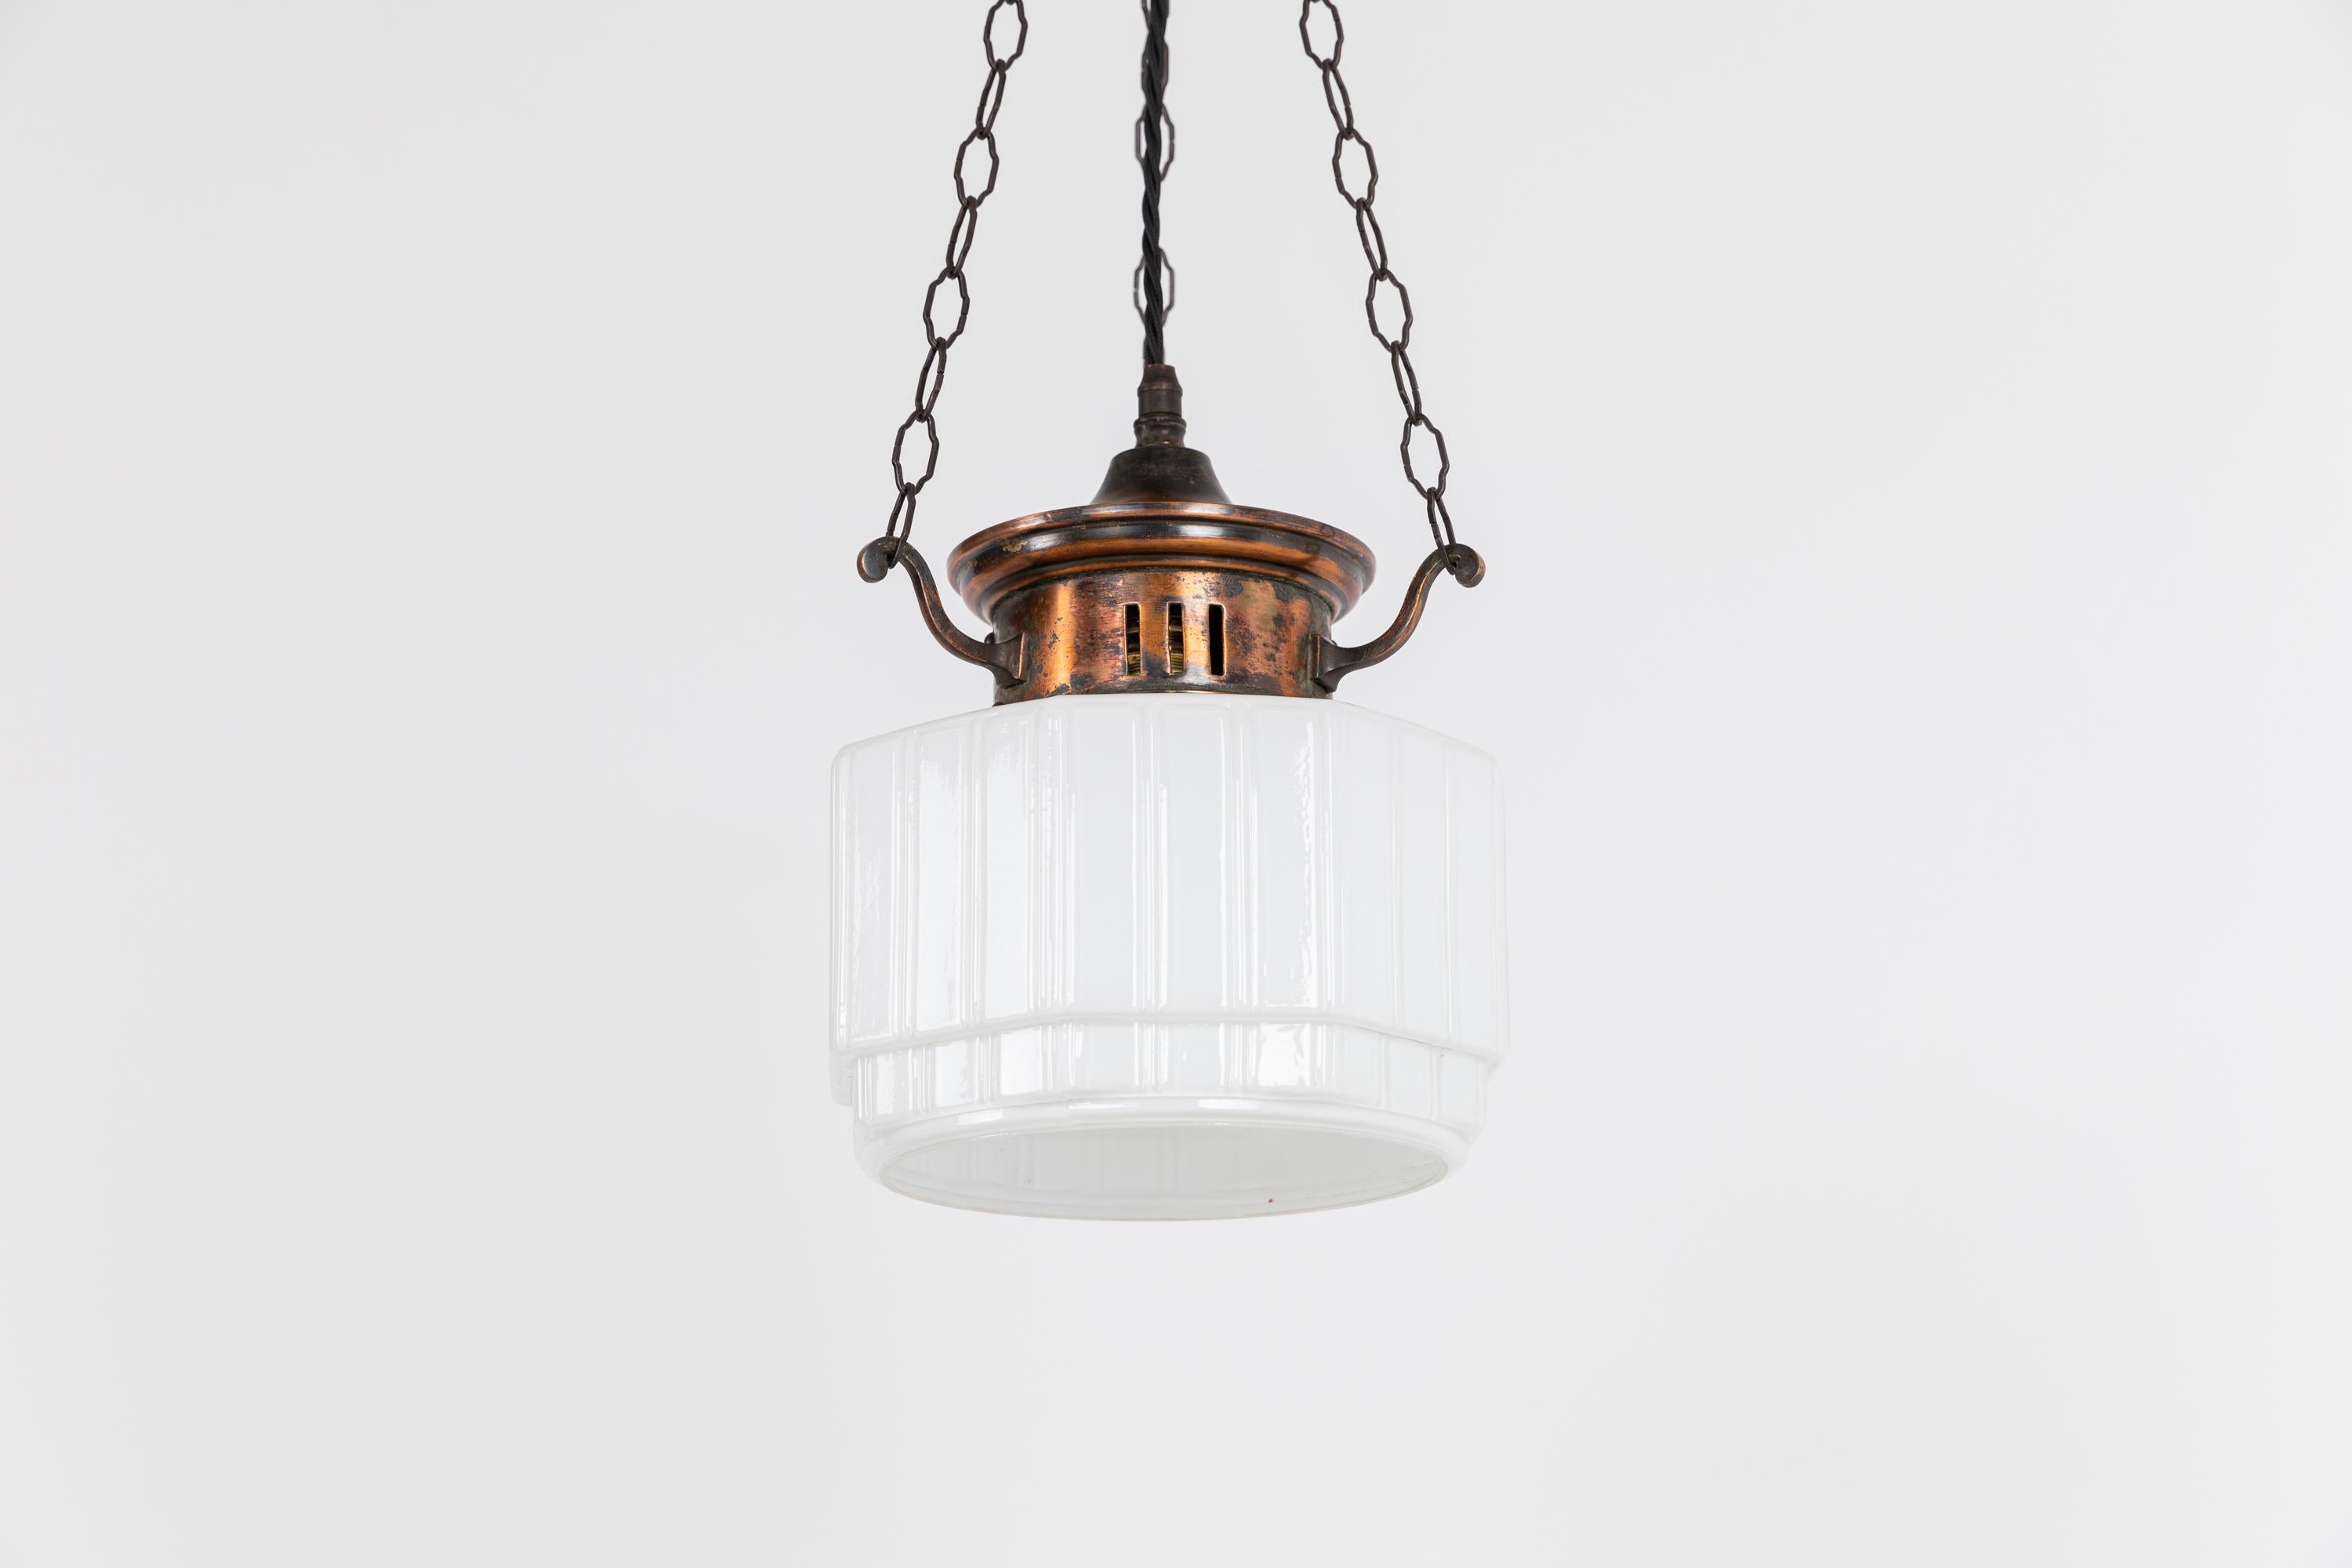 A diminutive and elgantly formed opaline pendant lamp with copper gallery. c.1920.

Thick pressed glass of ridged hexagonal form with open bottom, complete with copper gallery supported by three extended hooks and ornate ballhook. Ceiling hook also